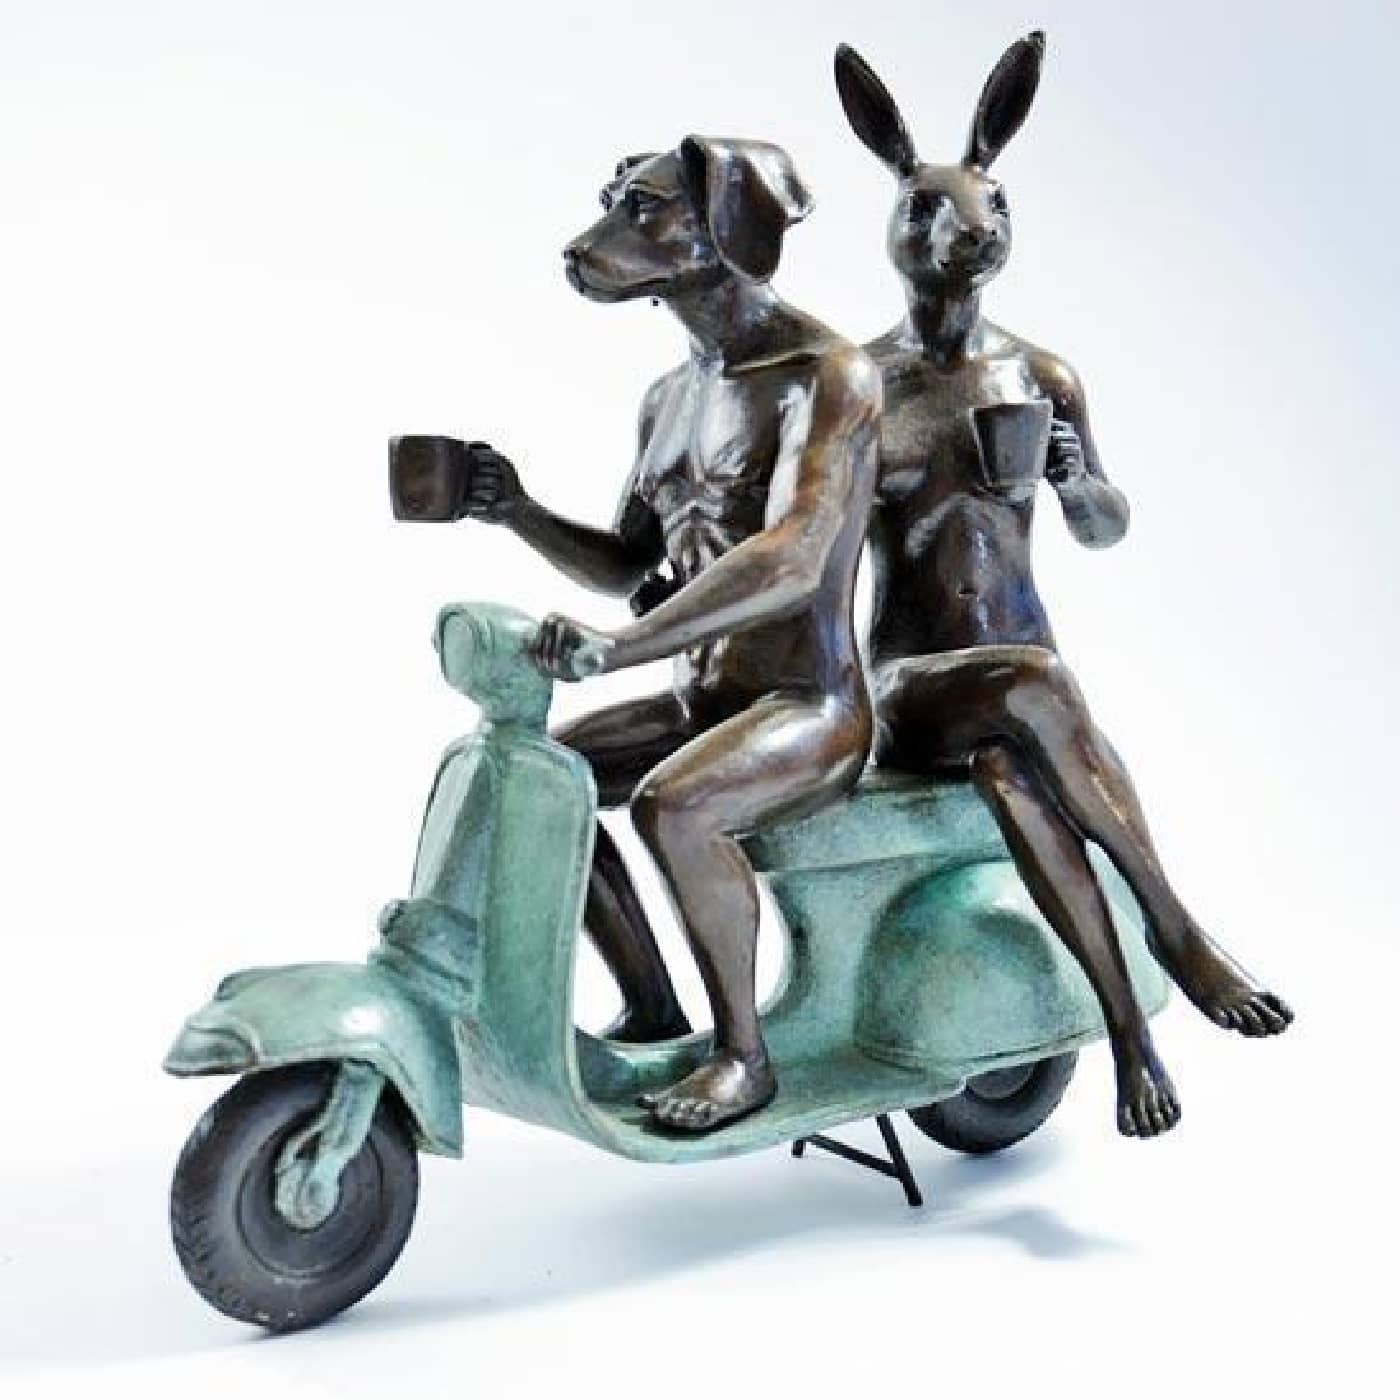 Gillie and Marc Bronze Sculpture ~ 'They Loved Coffee, Riding and Each Other' - Curate Art & Design Gallery Sorrento Mornington Peninsula Melbourne